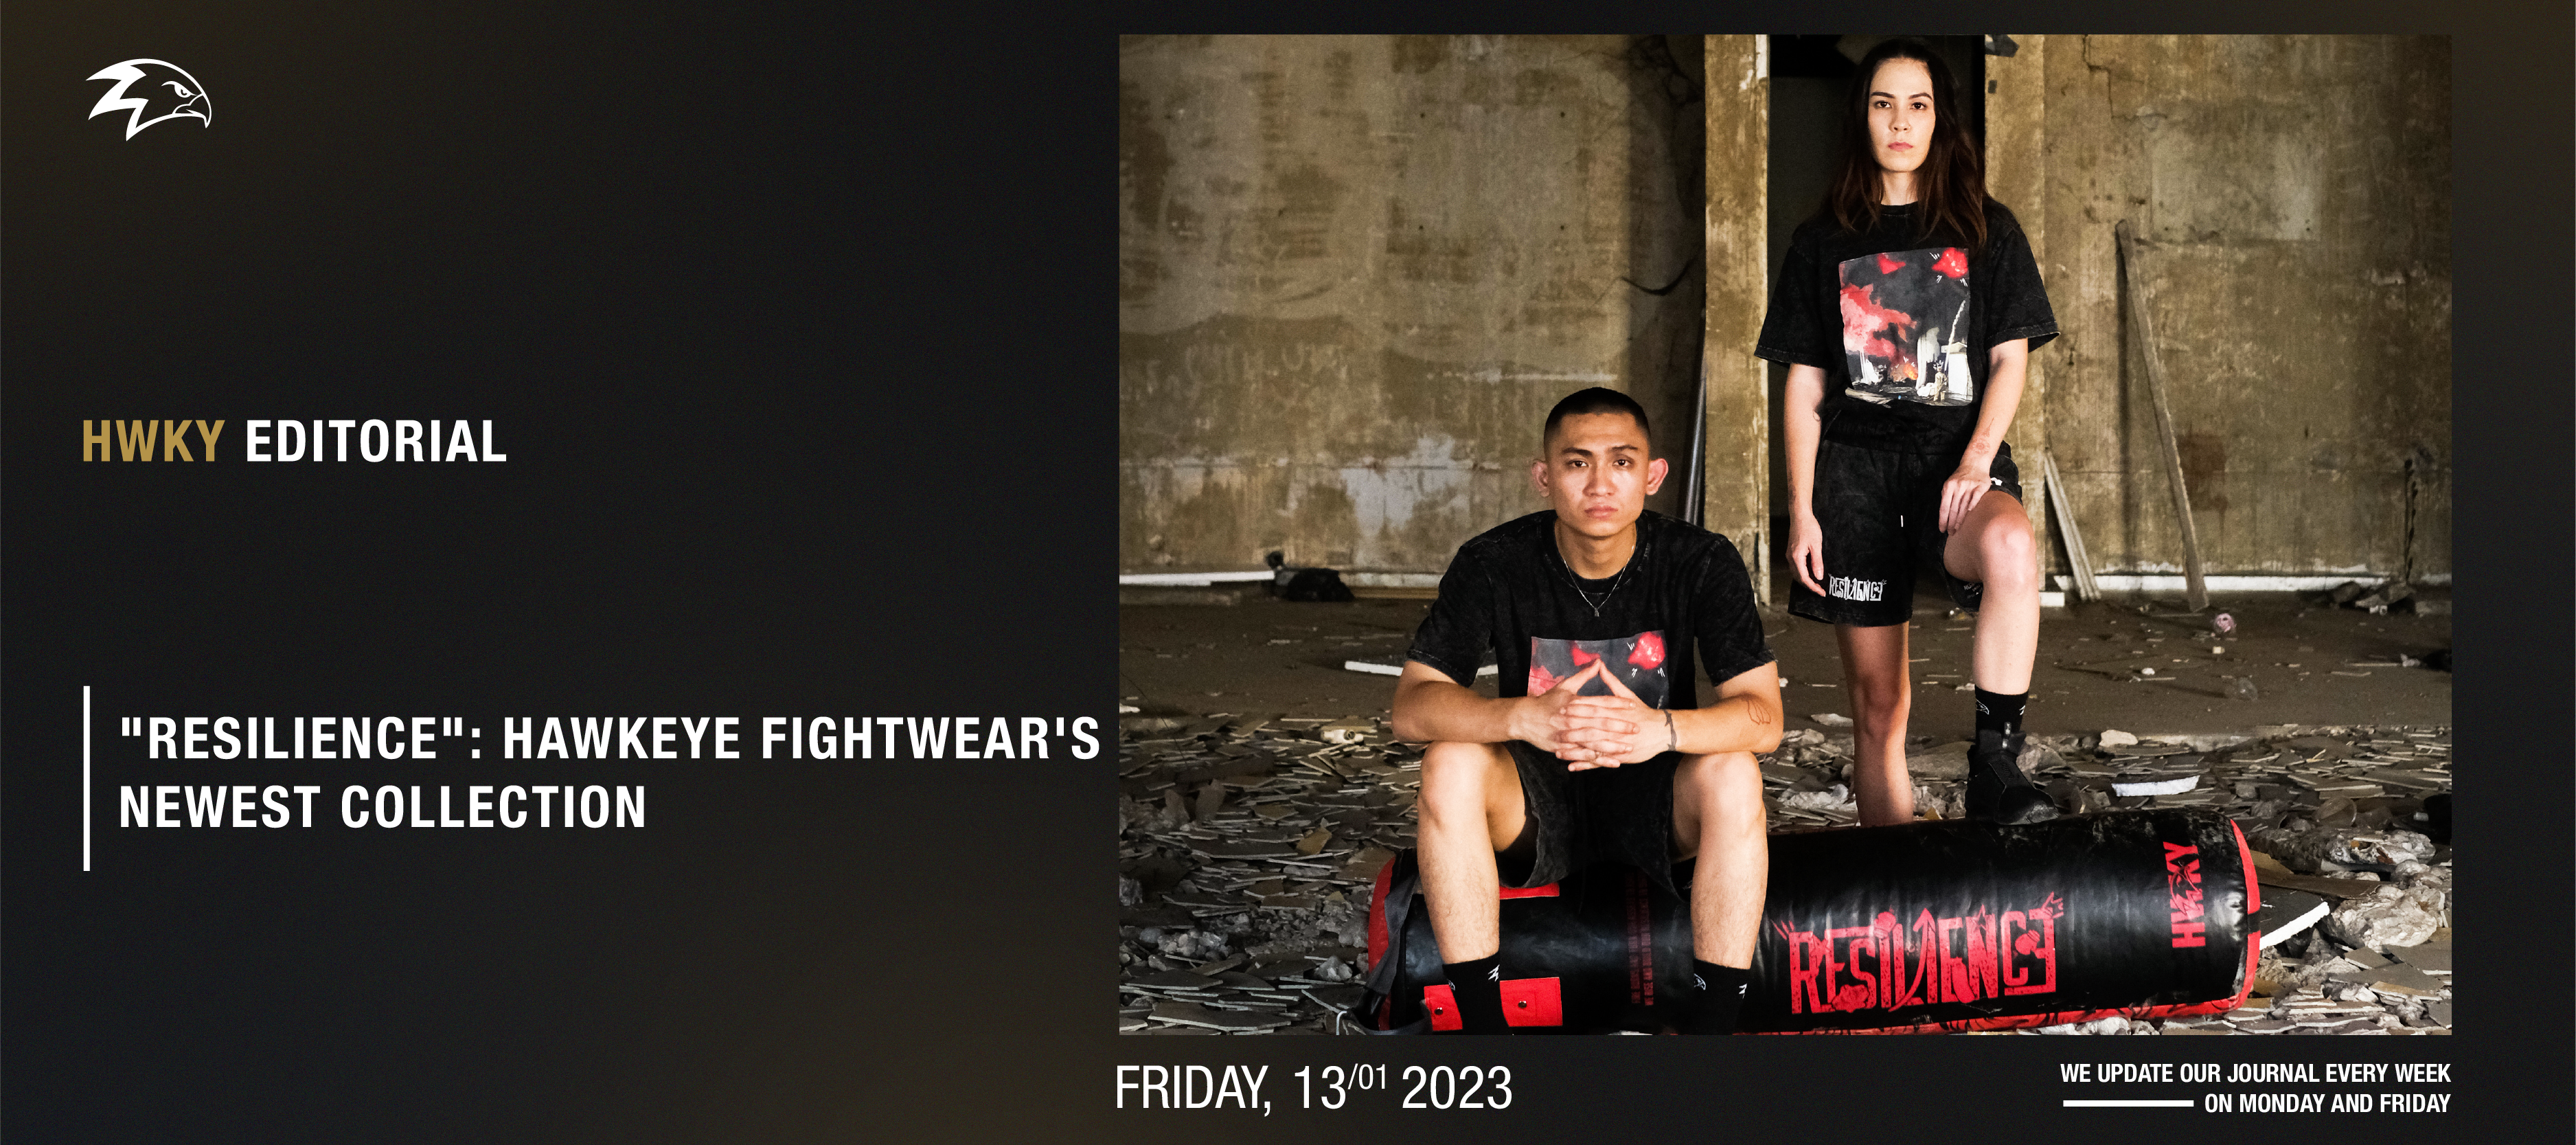 "Resilience": Hawkeye Fightwear's Newest Collection